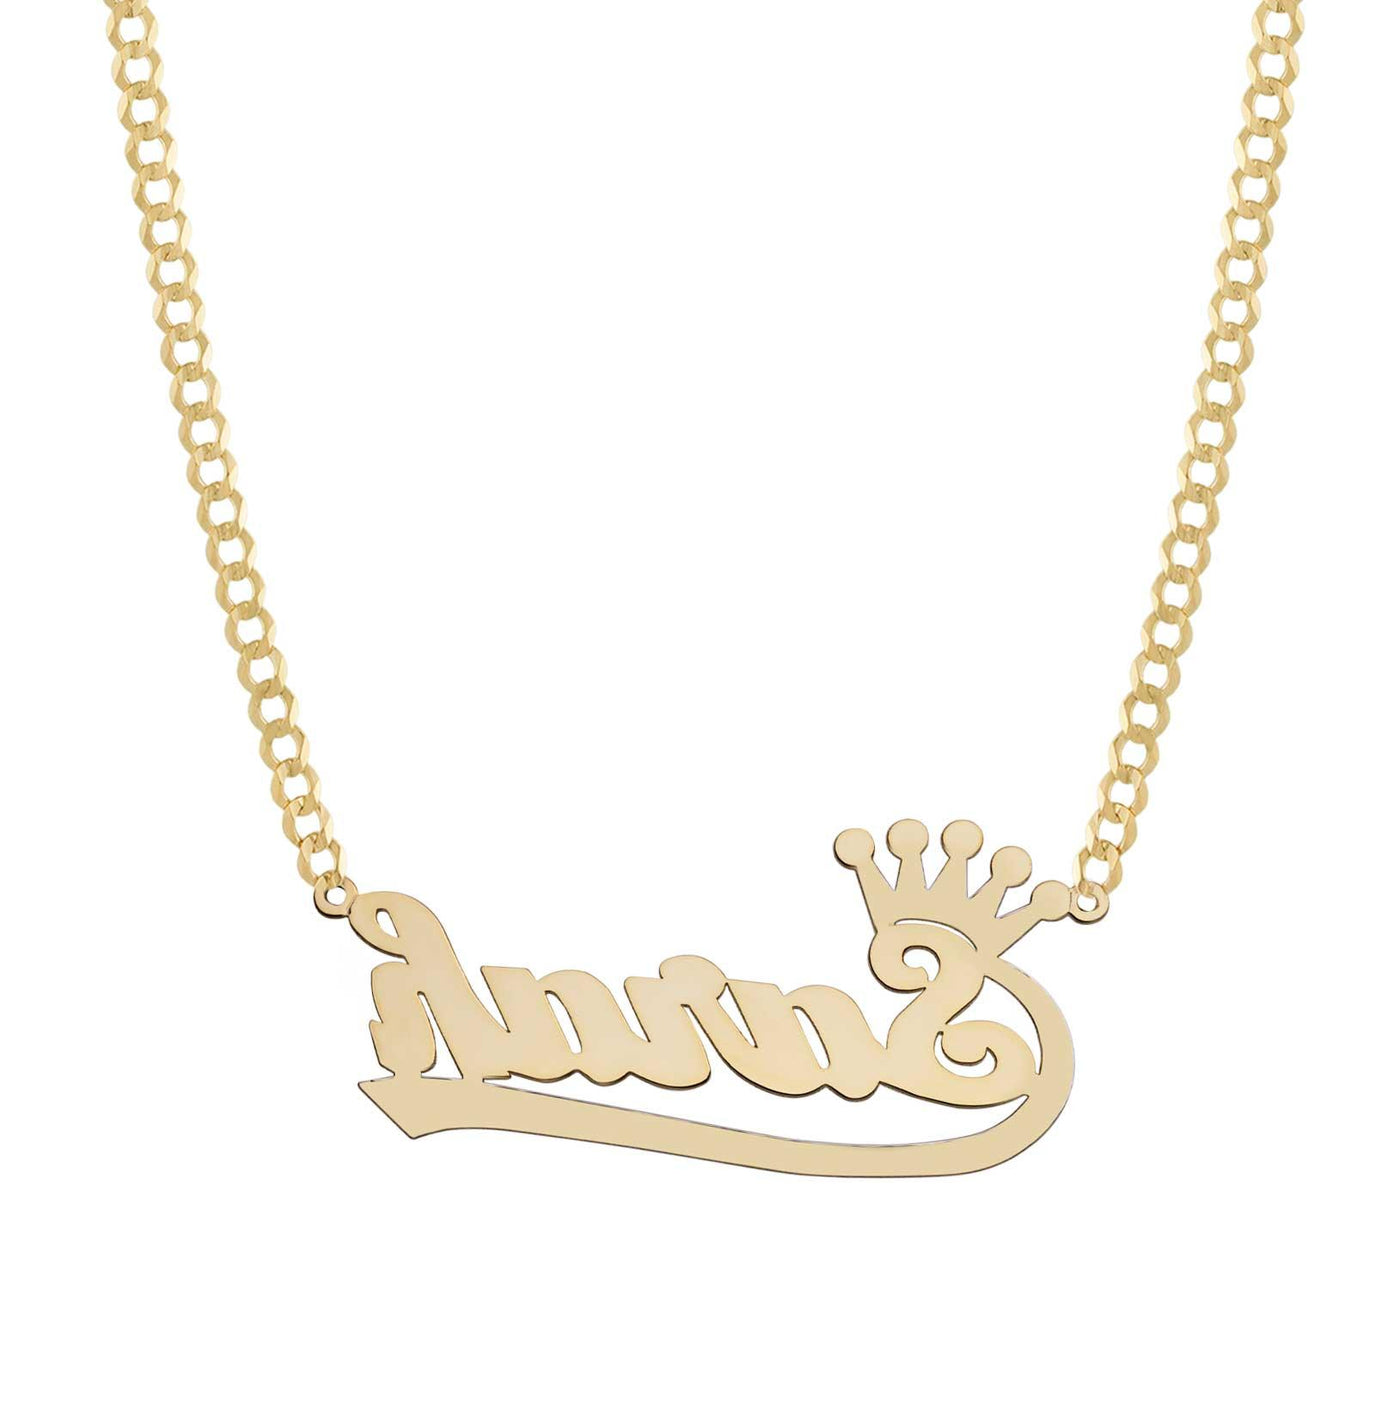 Ladies Crown Design Name Plate Necklace 14K Gold - Style 149 - bayamjewelry